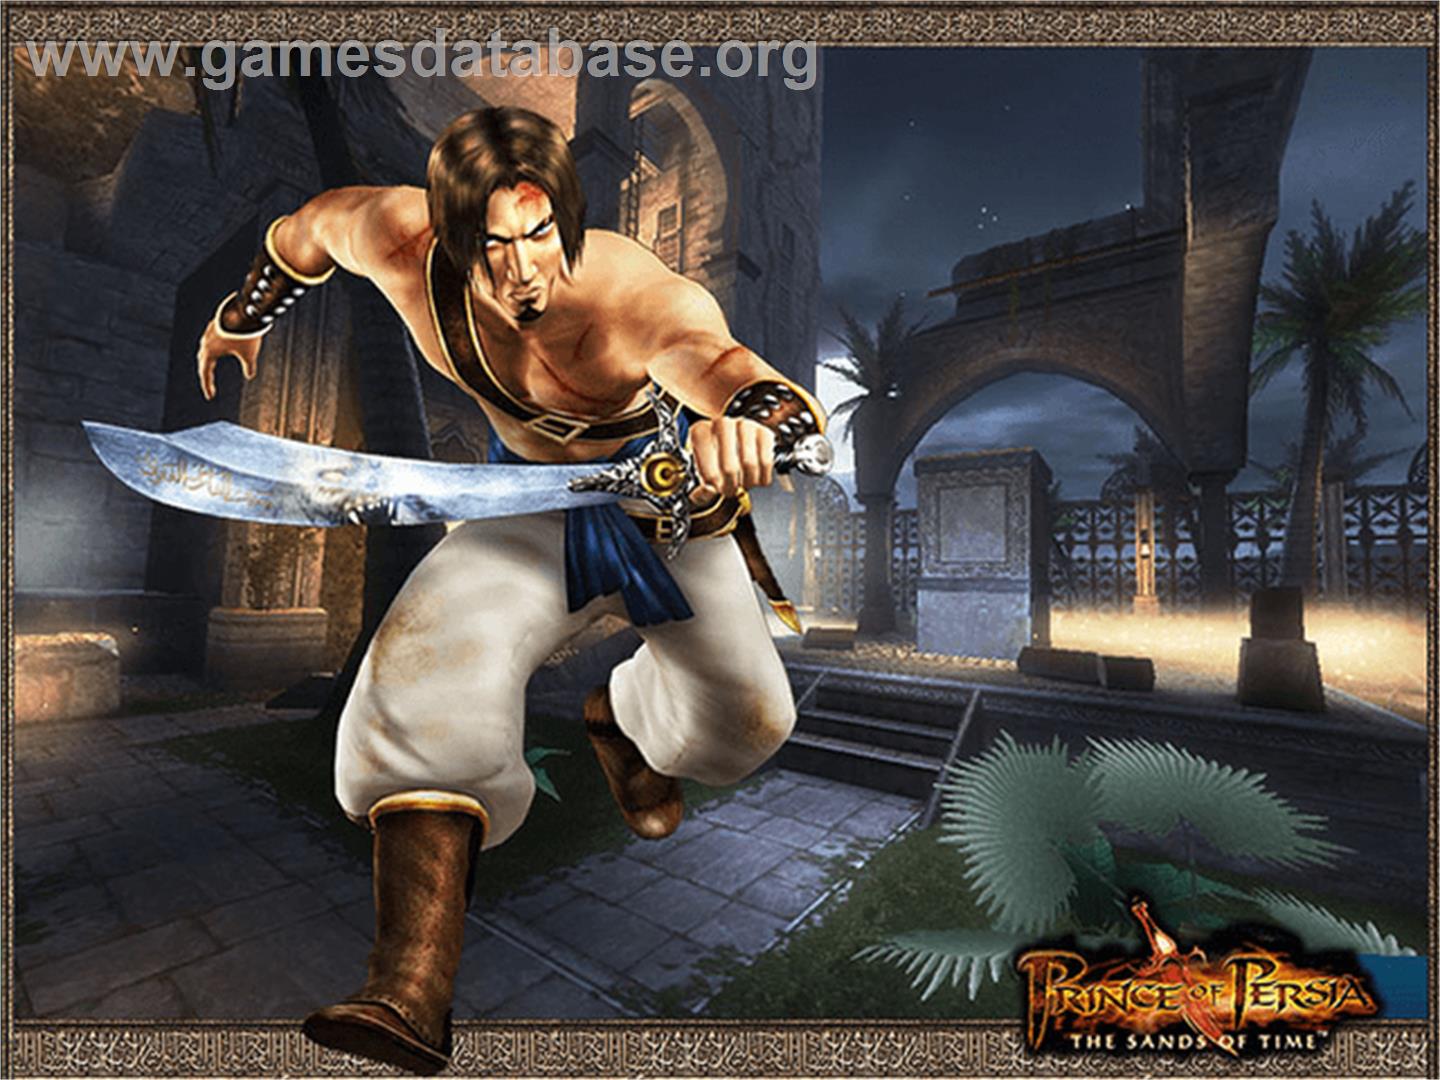 Prince of Persia: The Sands of Time - Microsoft Xbox - Artwork - Title Screen